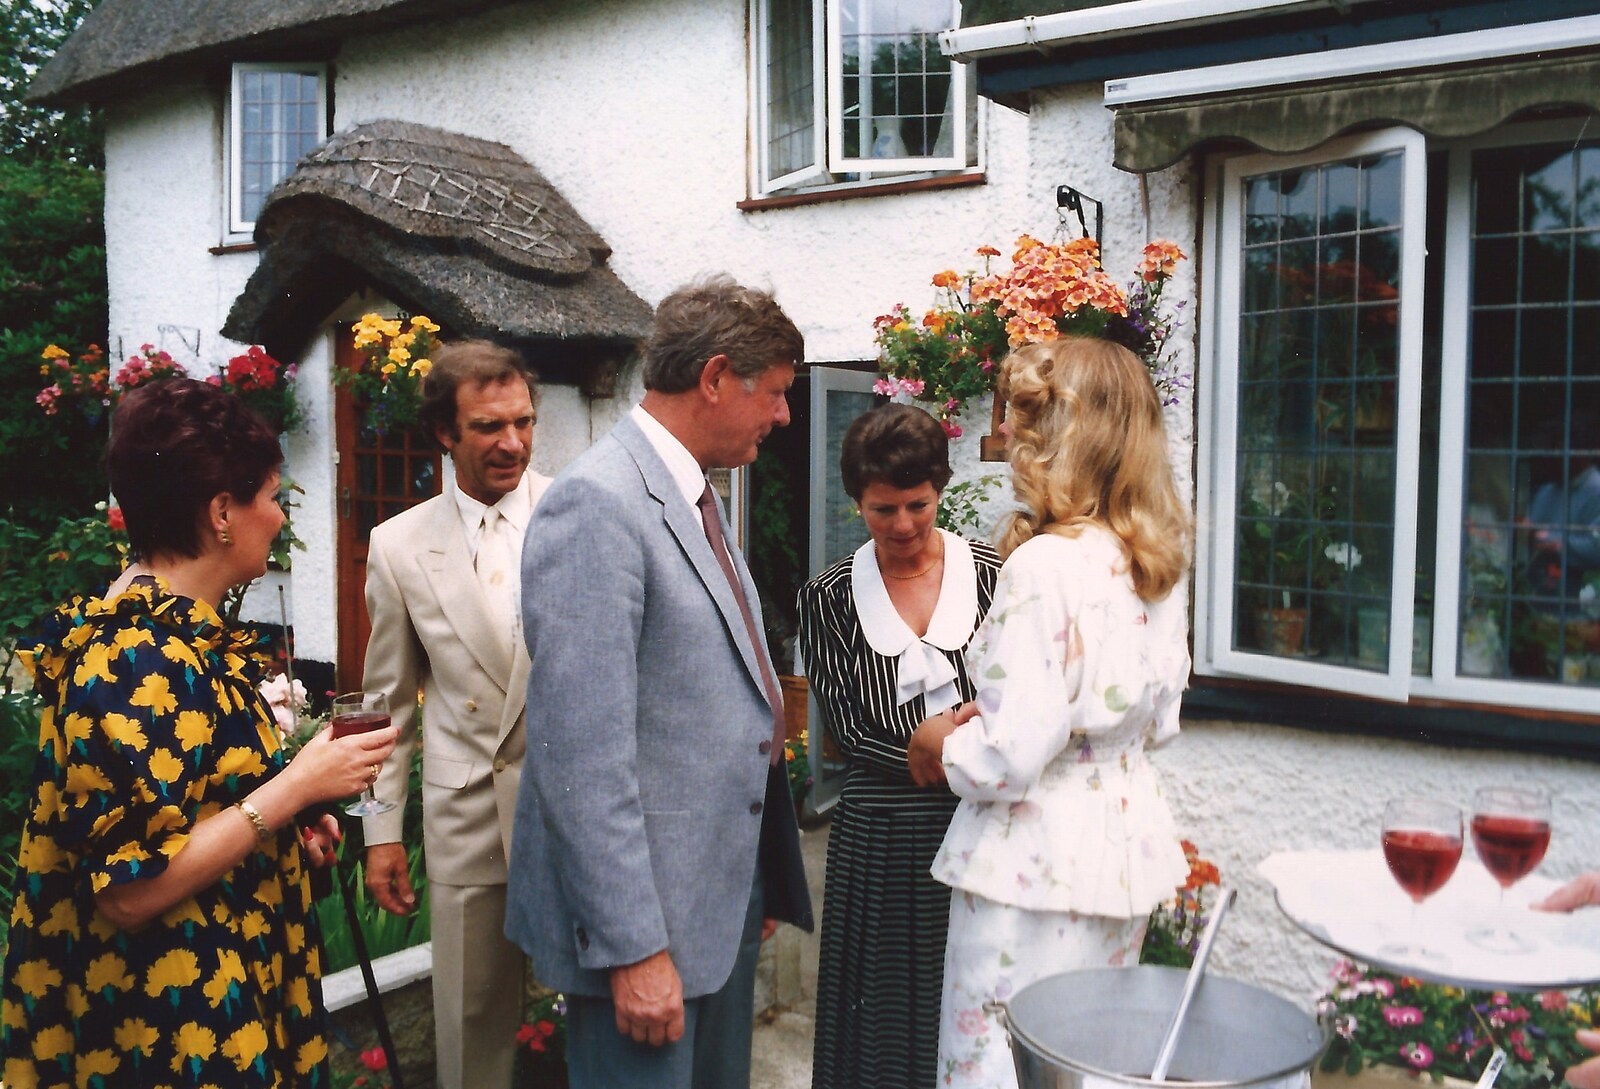 More chatting from Mother and Mike's Wedding Reception, Bransgore, Dorset - 20th August 1988